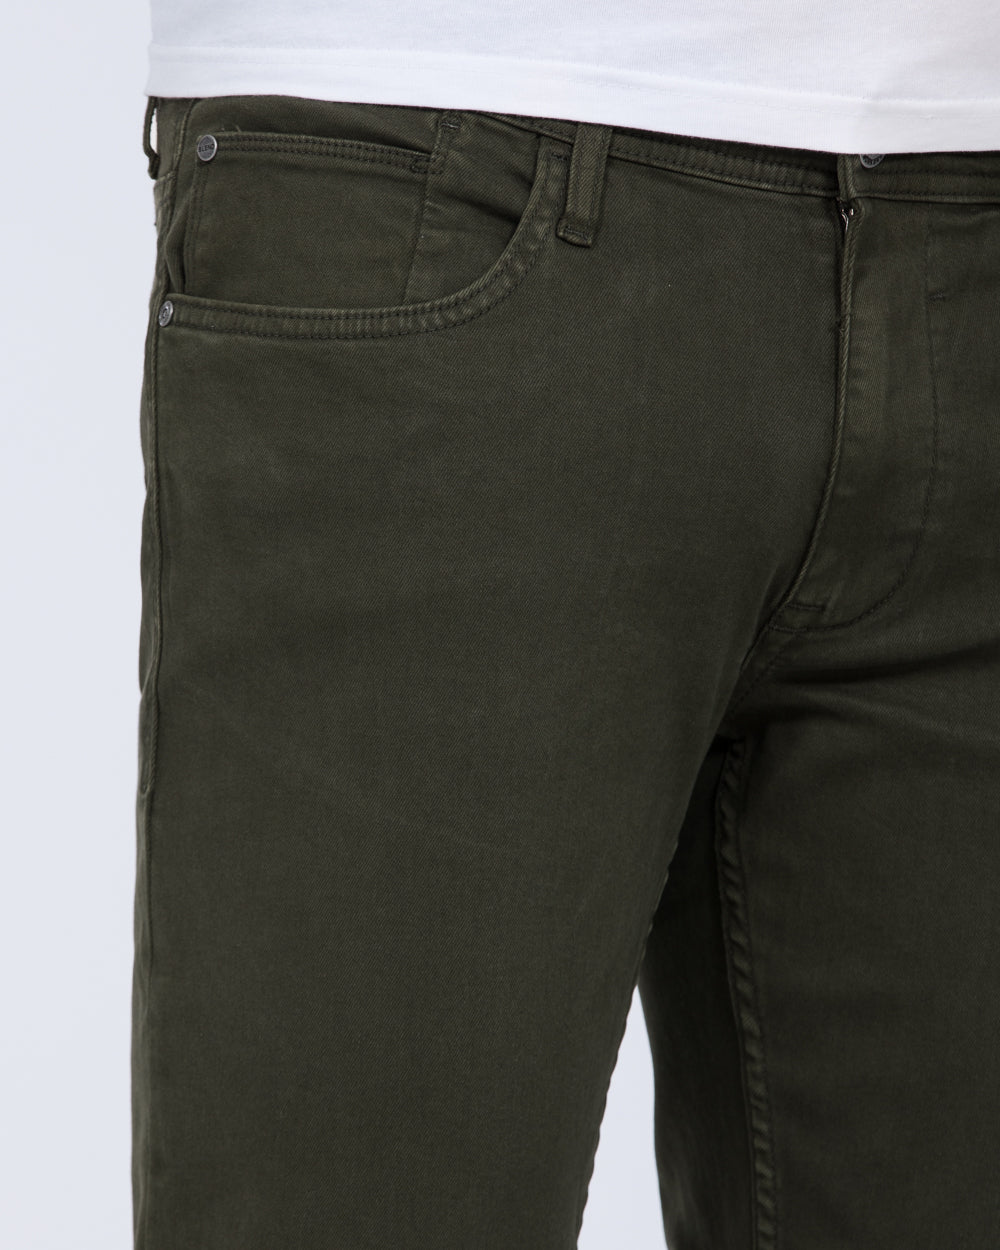 Blend Twister Tapered Fit Tall Jeans (forest green)